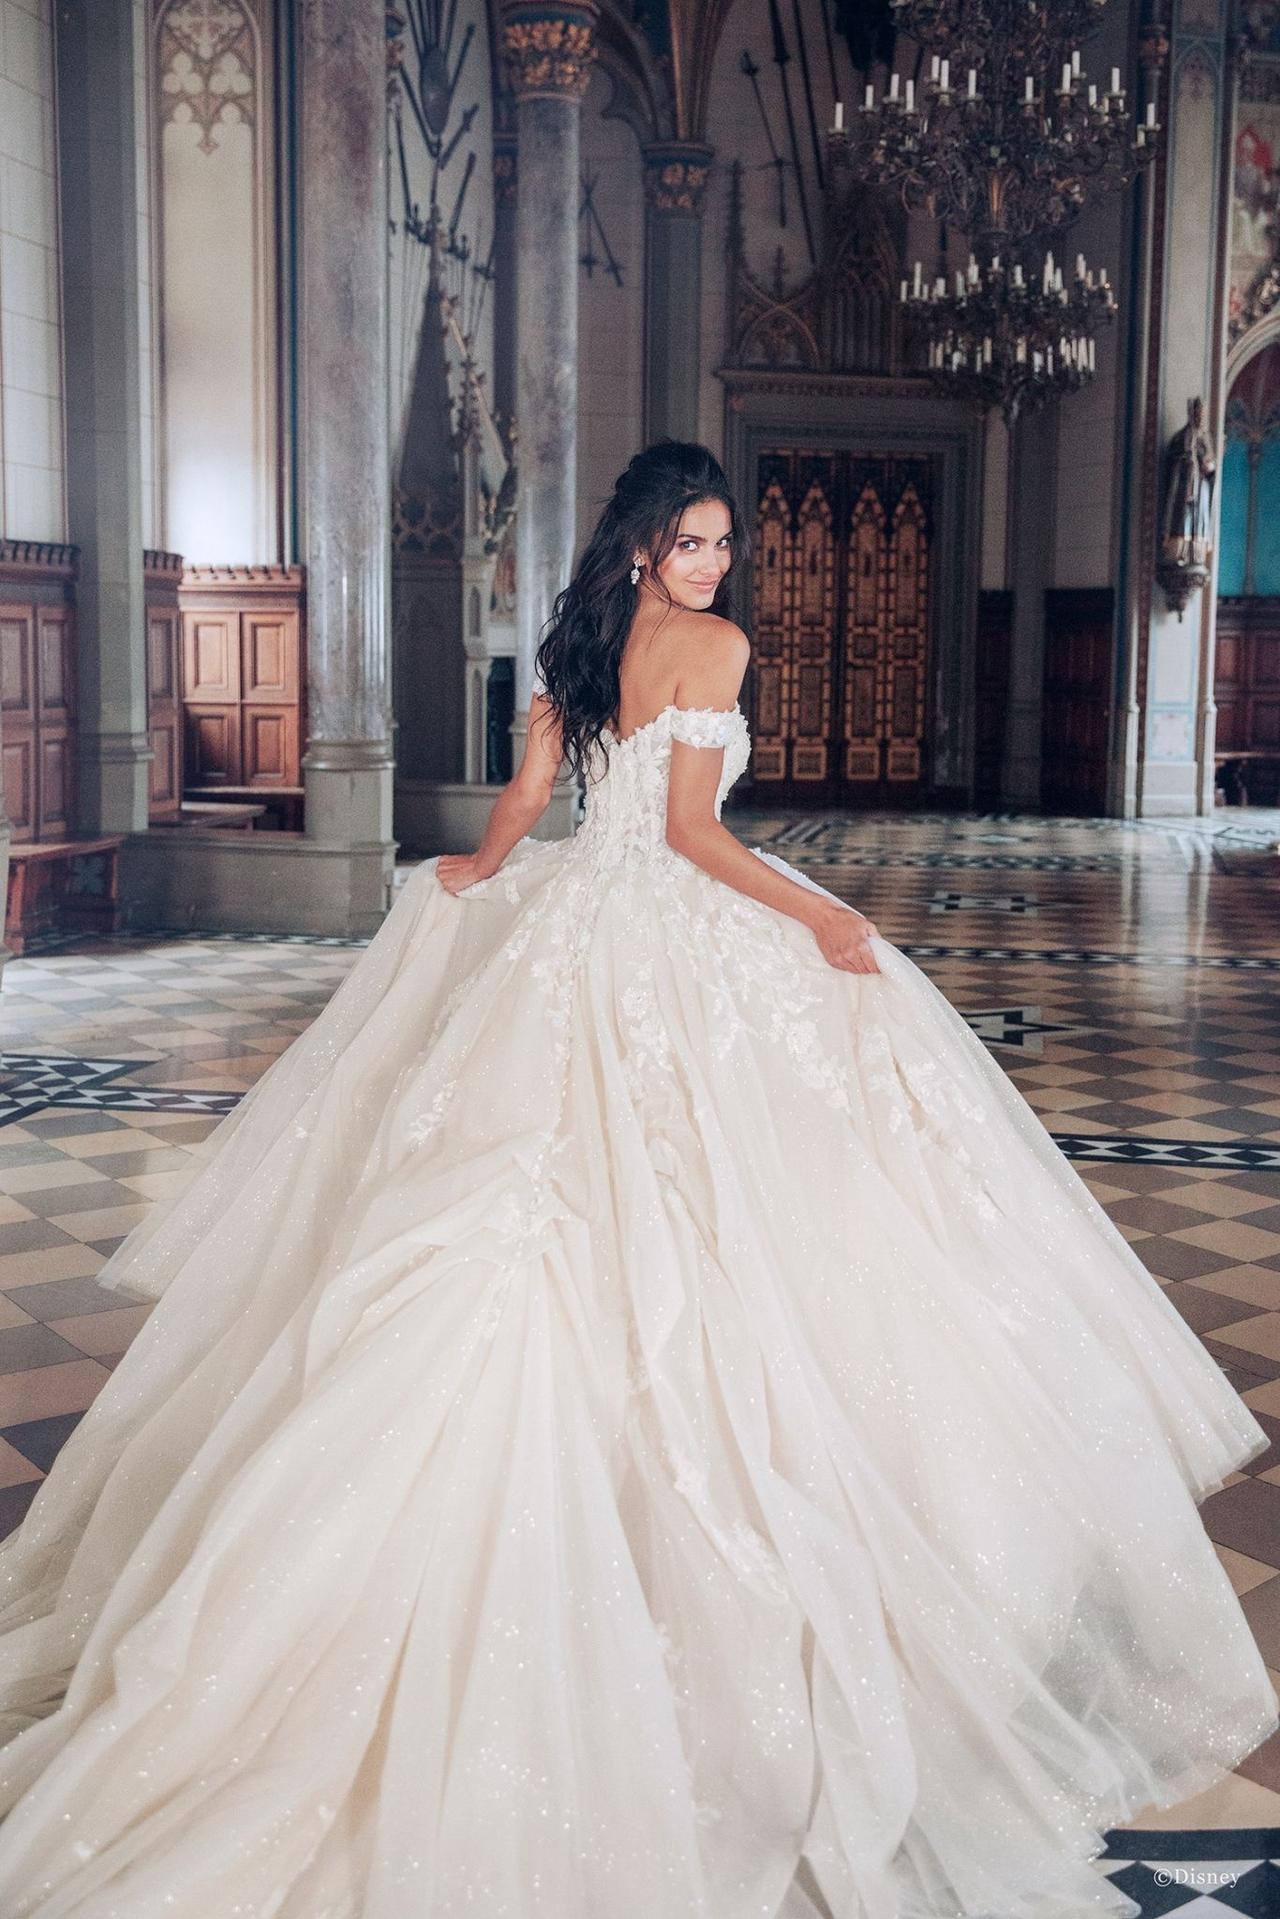 The Tiana Wedding Gowns | The Bridal Collection in Denver